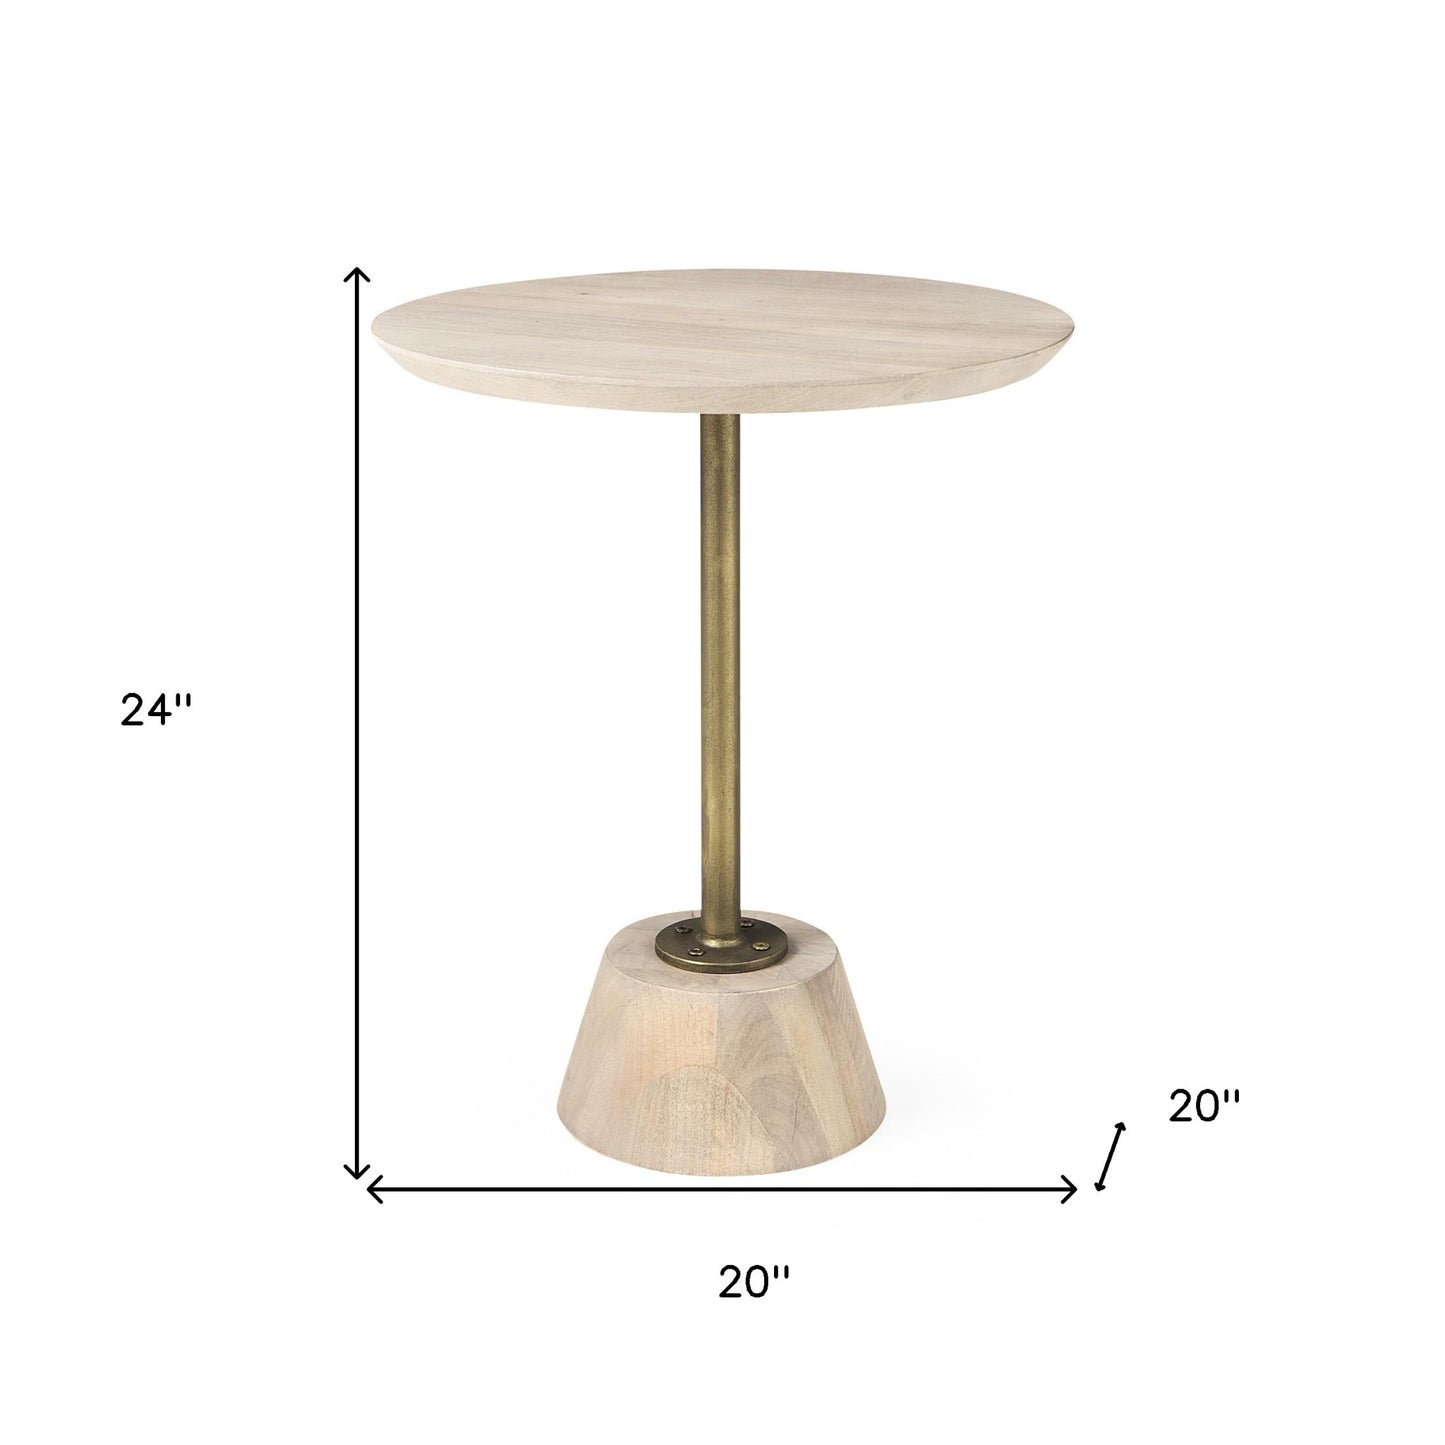 Light Blond Pedestal Table With Gold Detailing